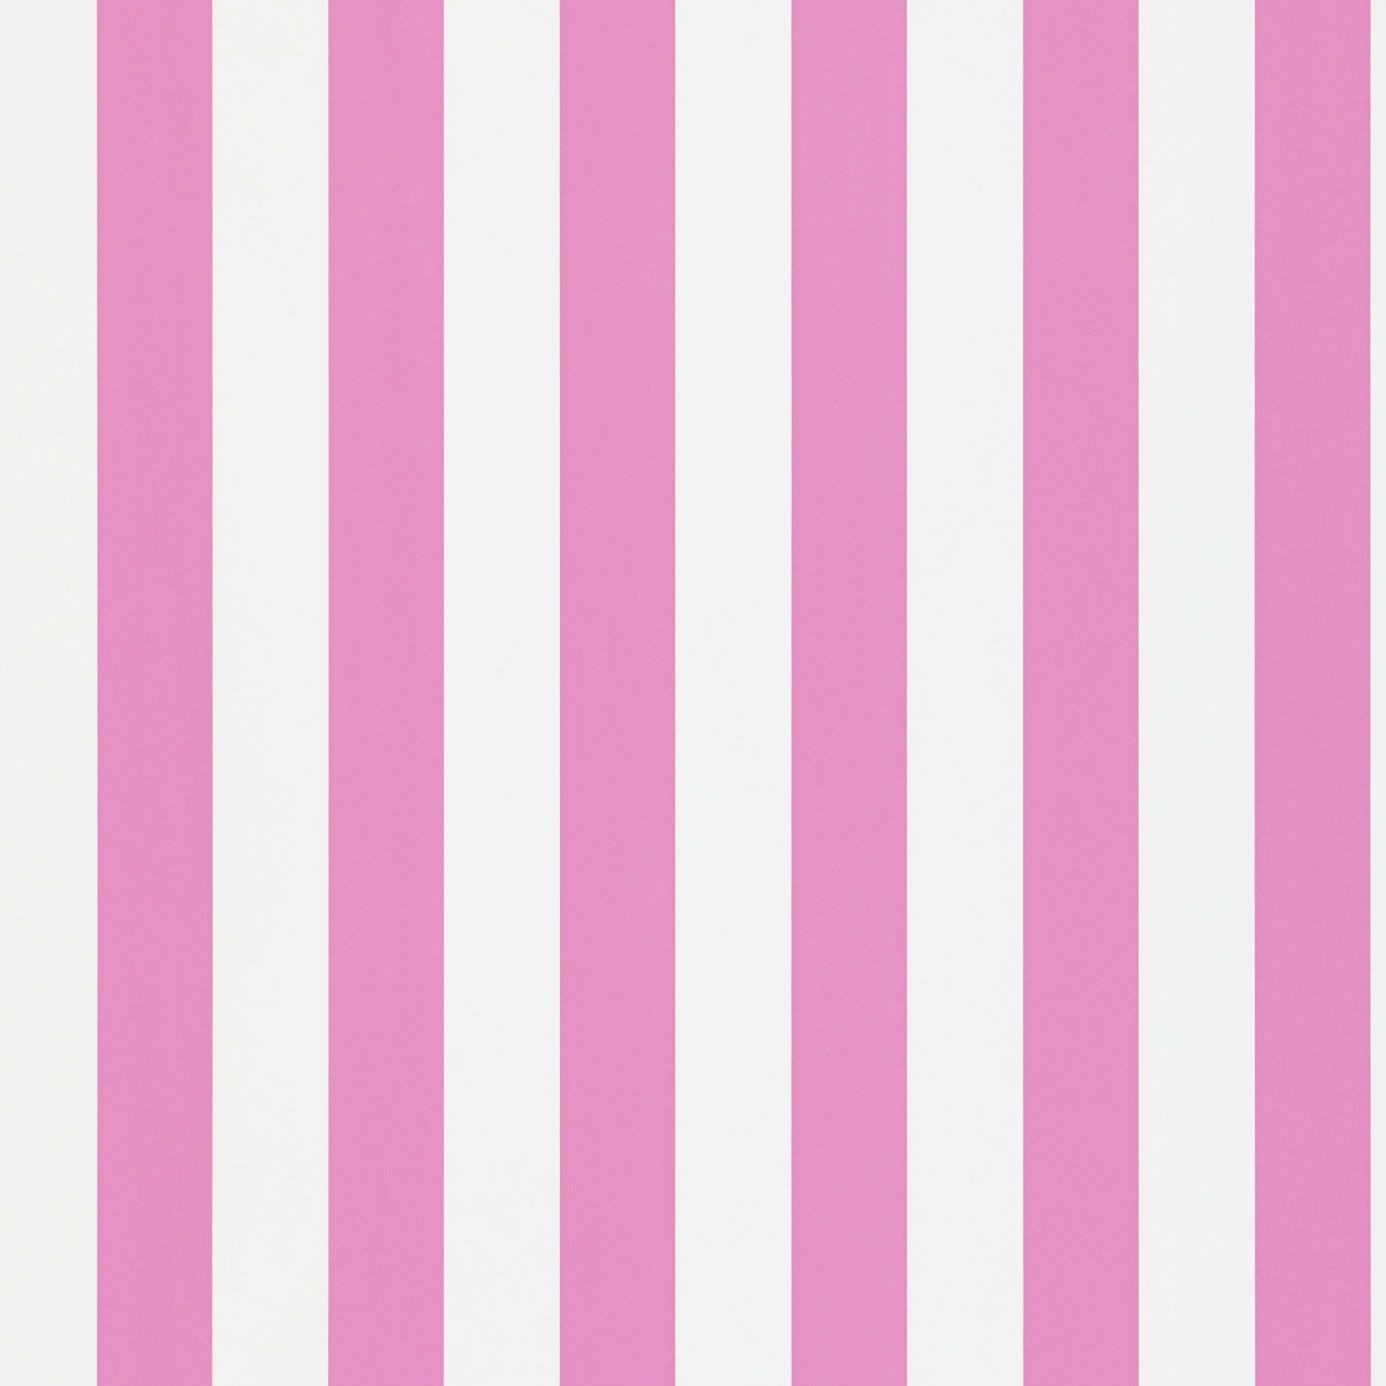 Checkered  White and Light Pink Art Print by CheckeredAndDiamonds  Pink  art print Pink and black wallpaper Light pink walls